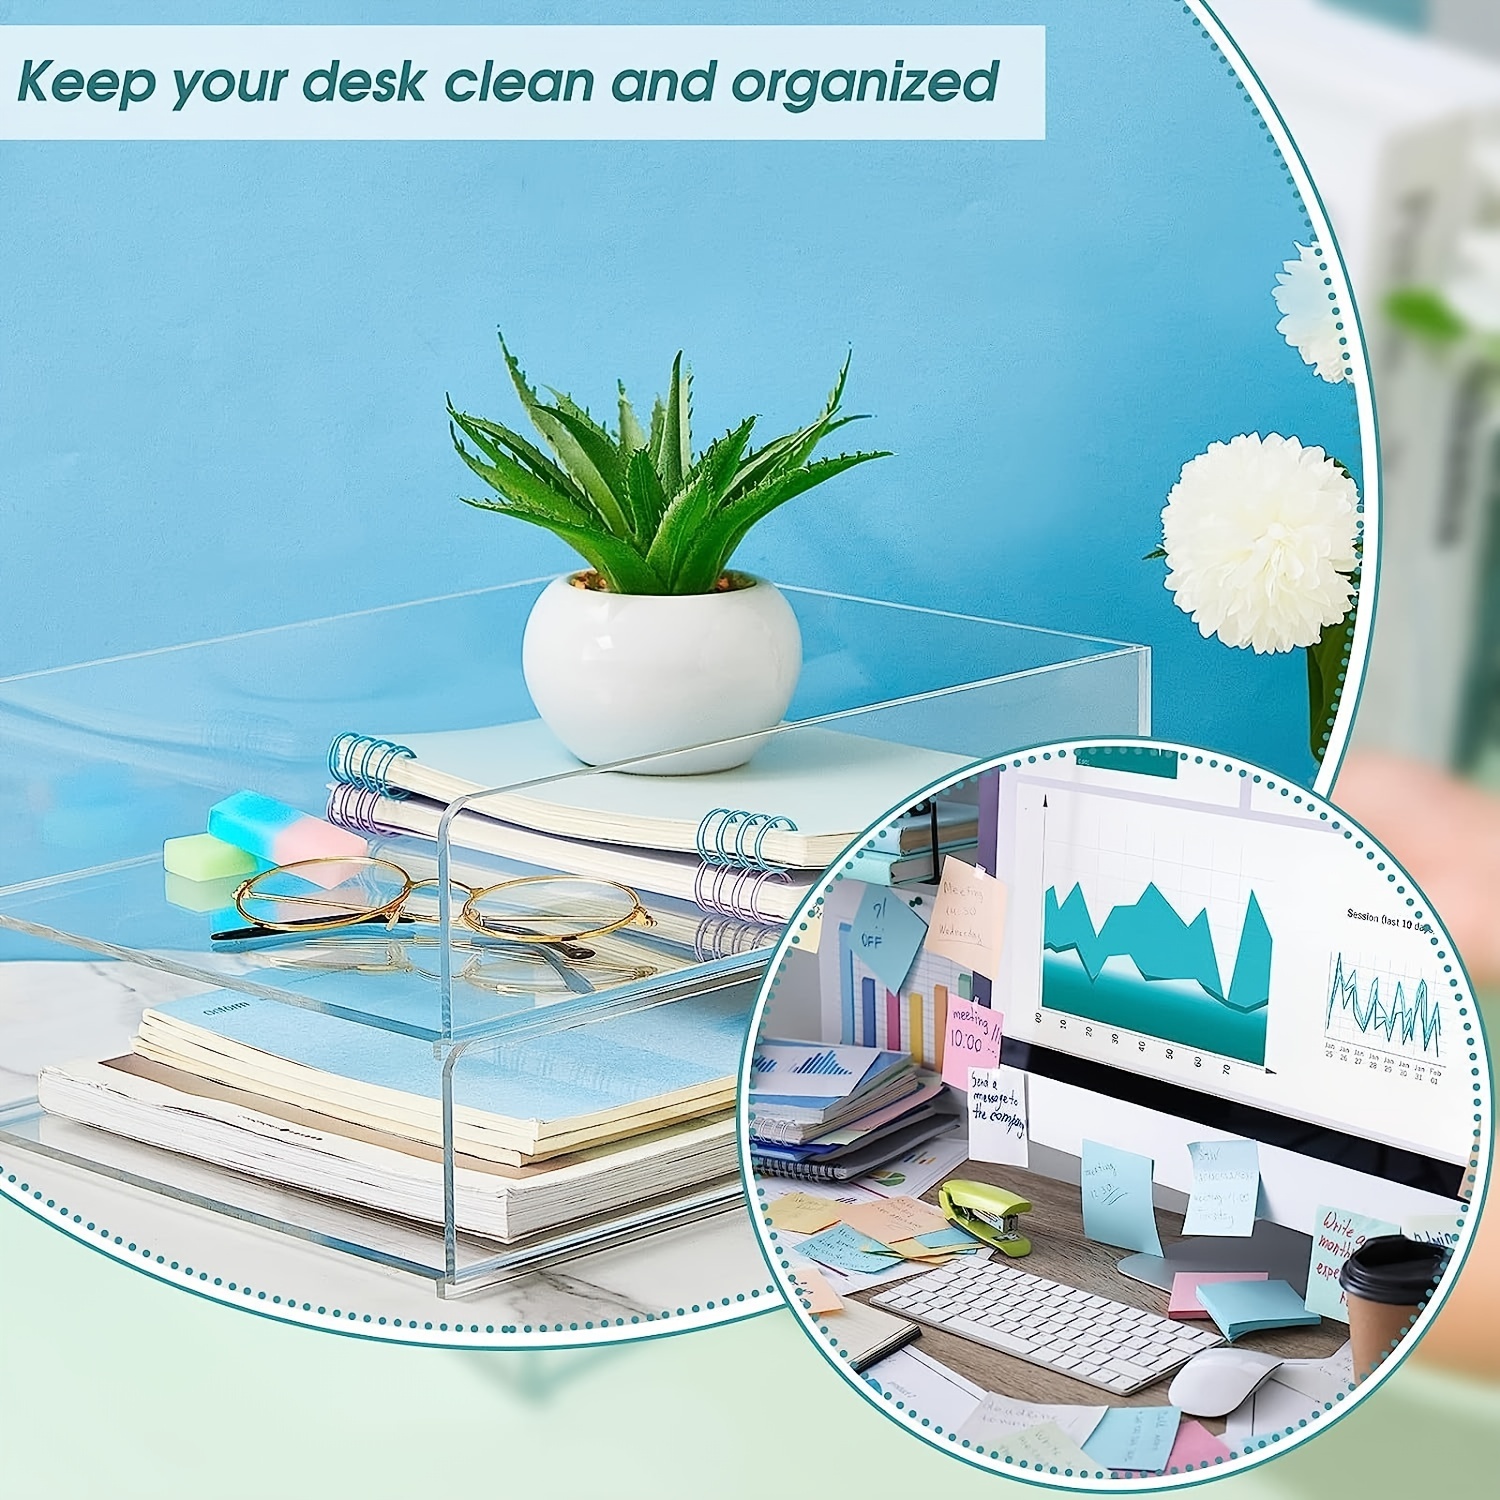 Elavain Acrylic Stackable Paper Tray Organizer for Desk, 3 Tier Elegant Paper Organizer Tray, Clear Desk Organizer with White Edges for Home